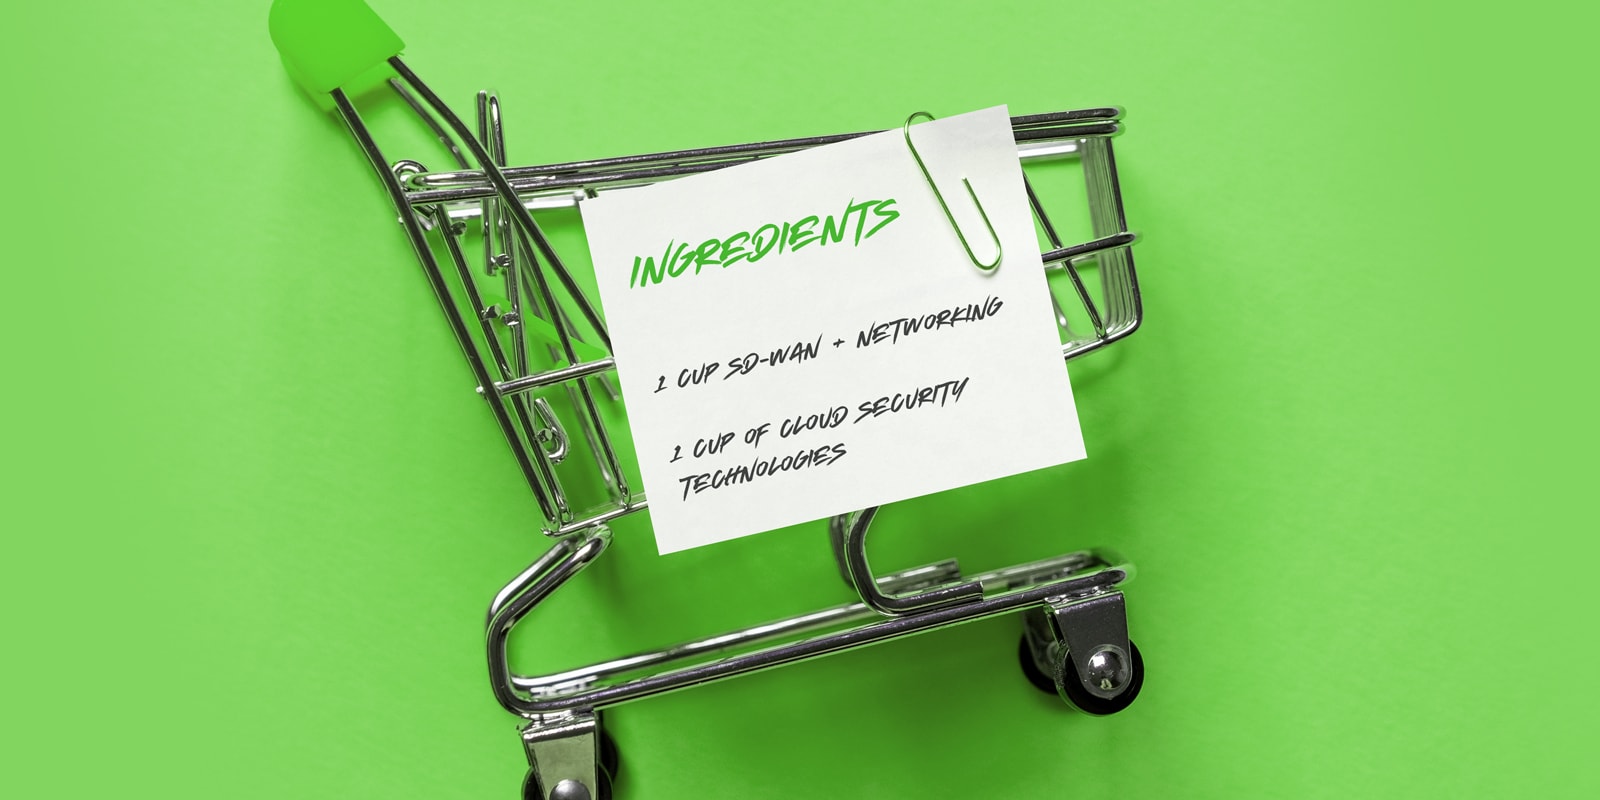 miniature shopping cart on green background with SASE ingredients card attached